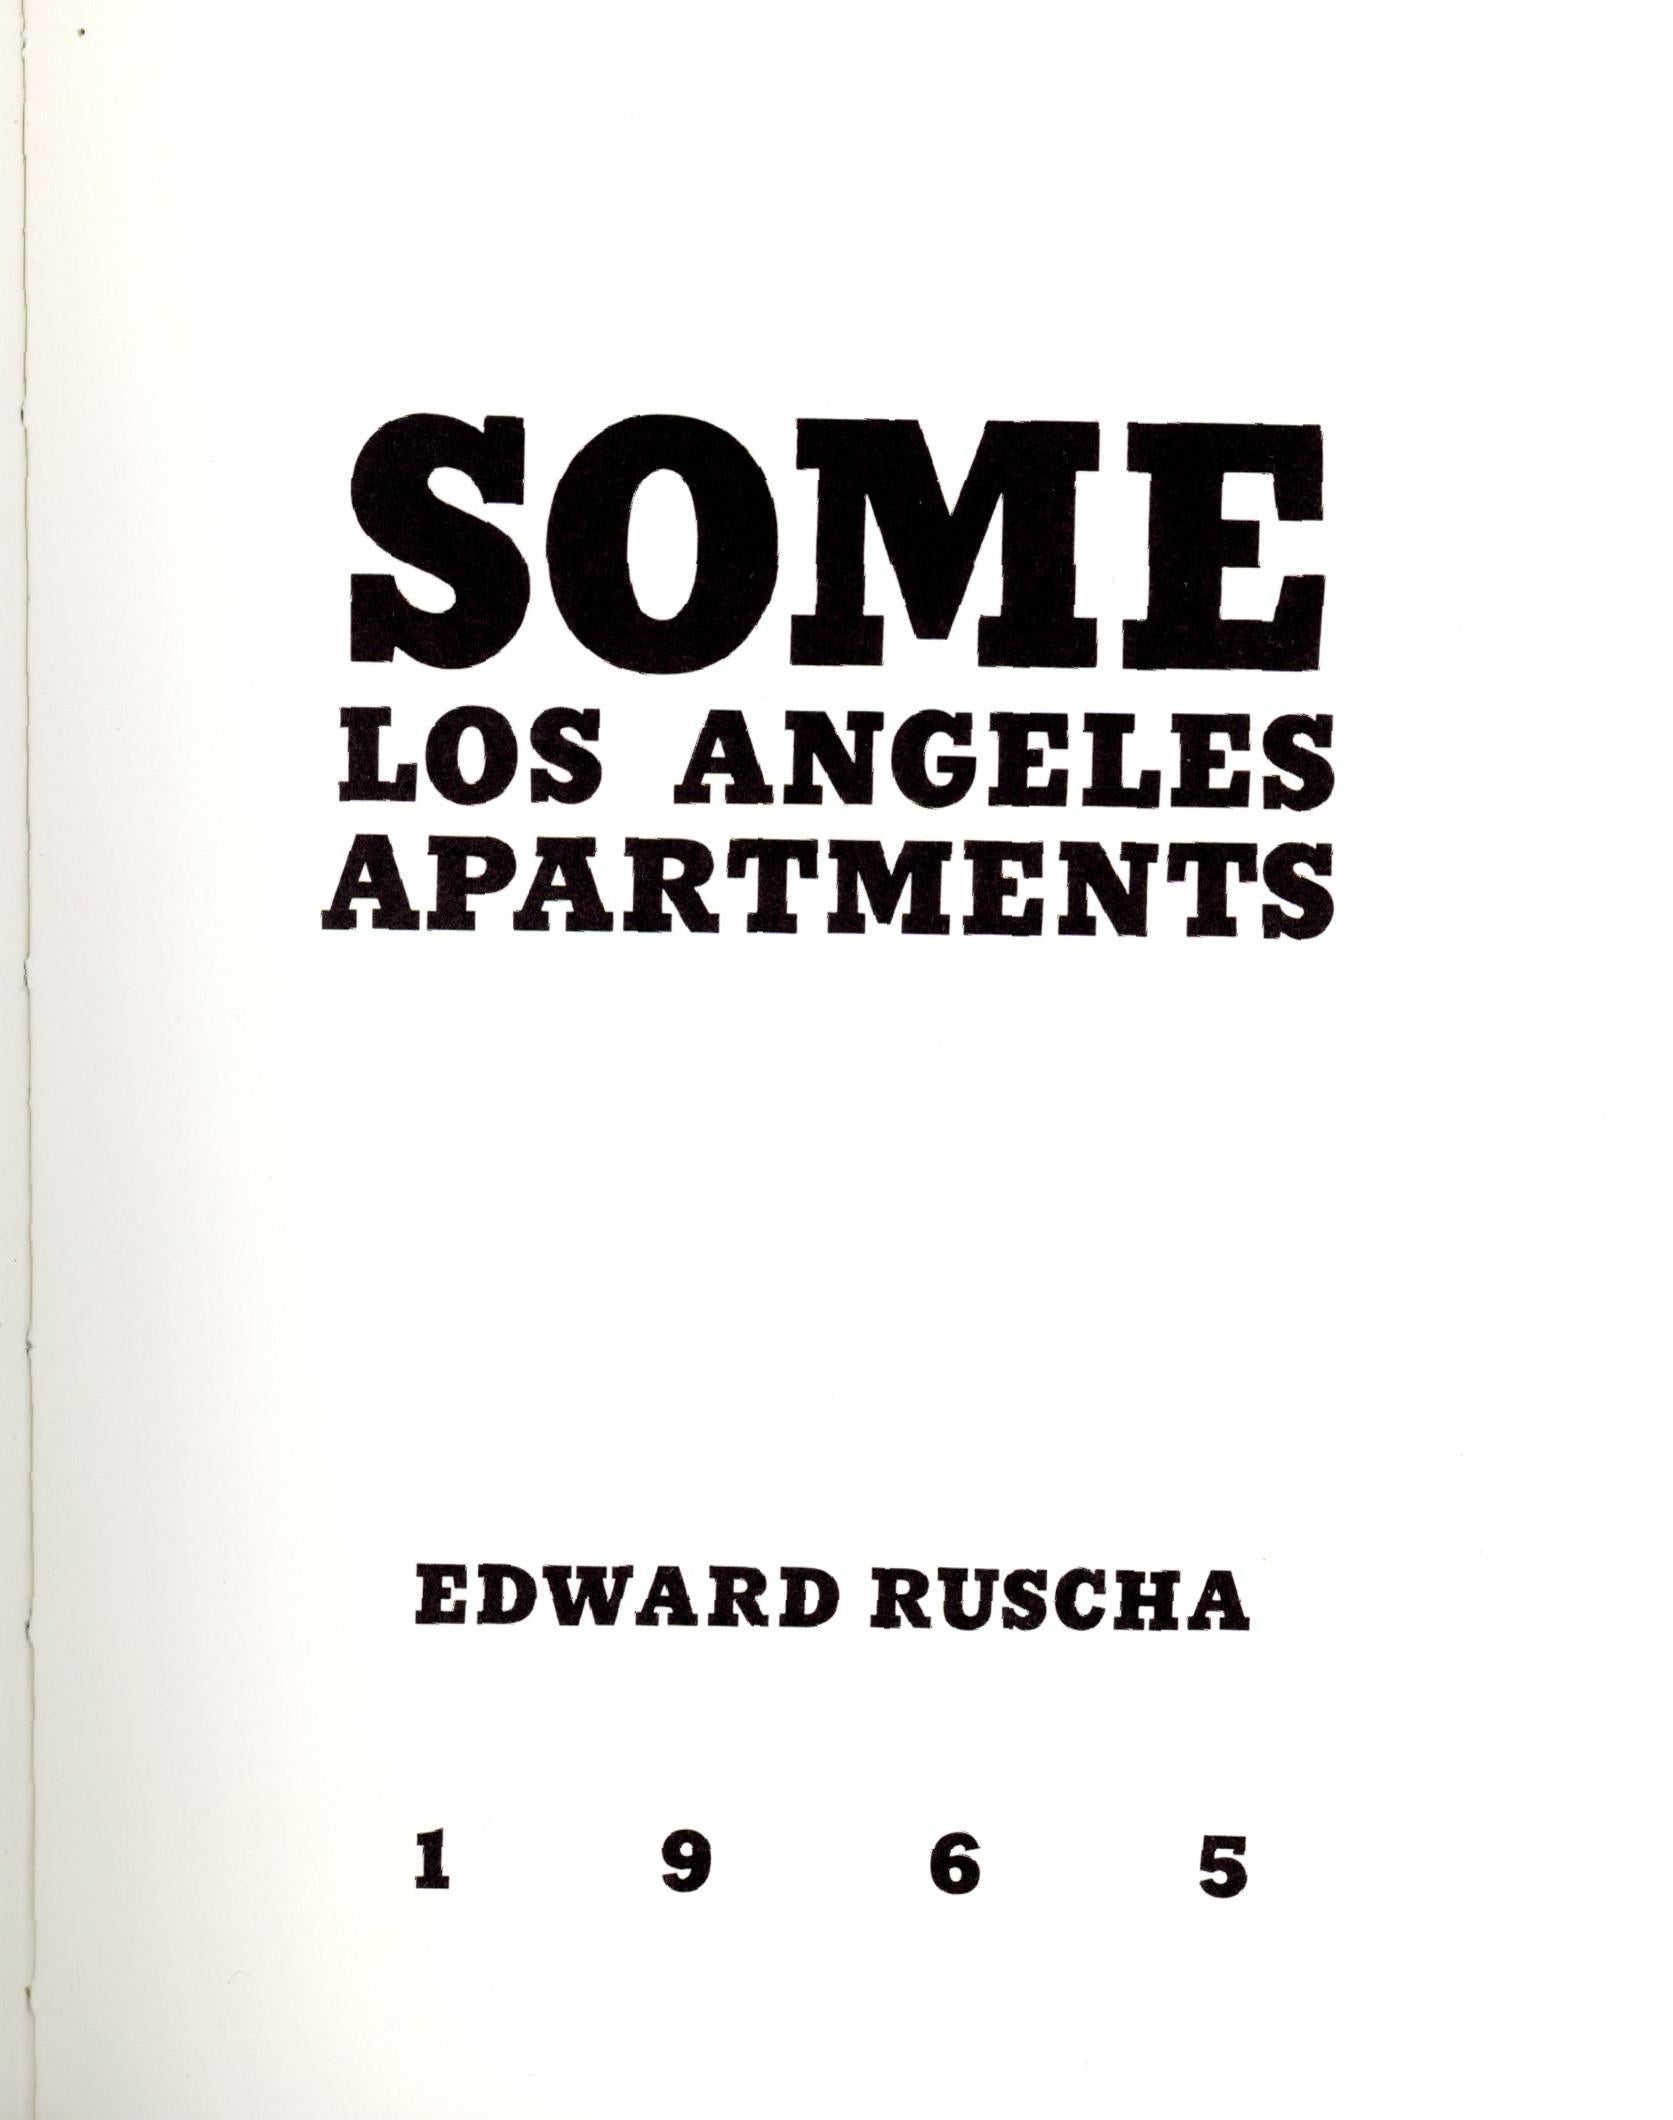 Some Los Angeles Apartments - Artist Book published in a limited edition of 3000 - Photograph by Ed Ruscha